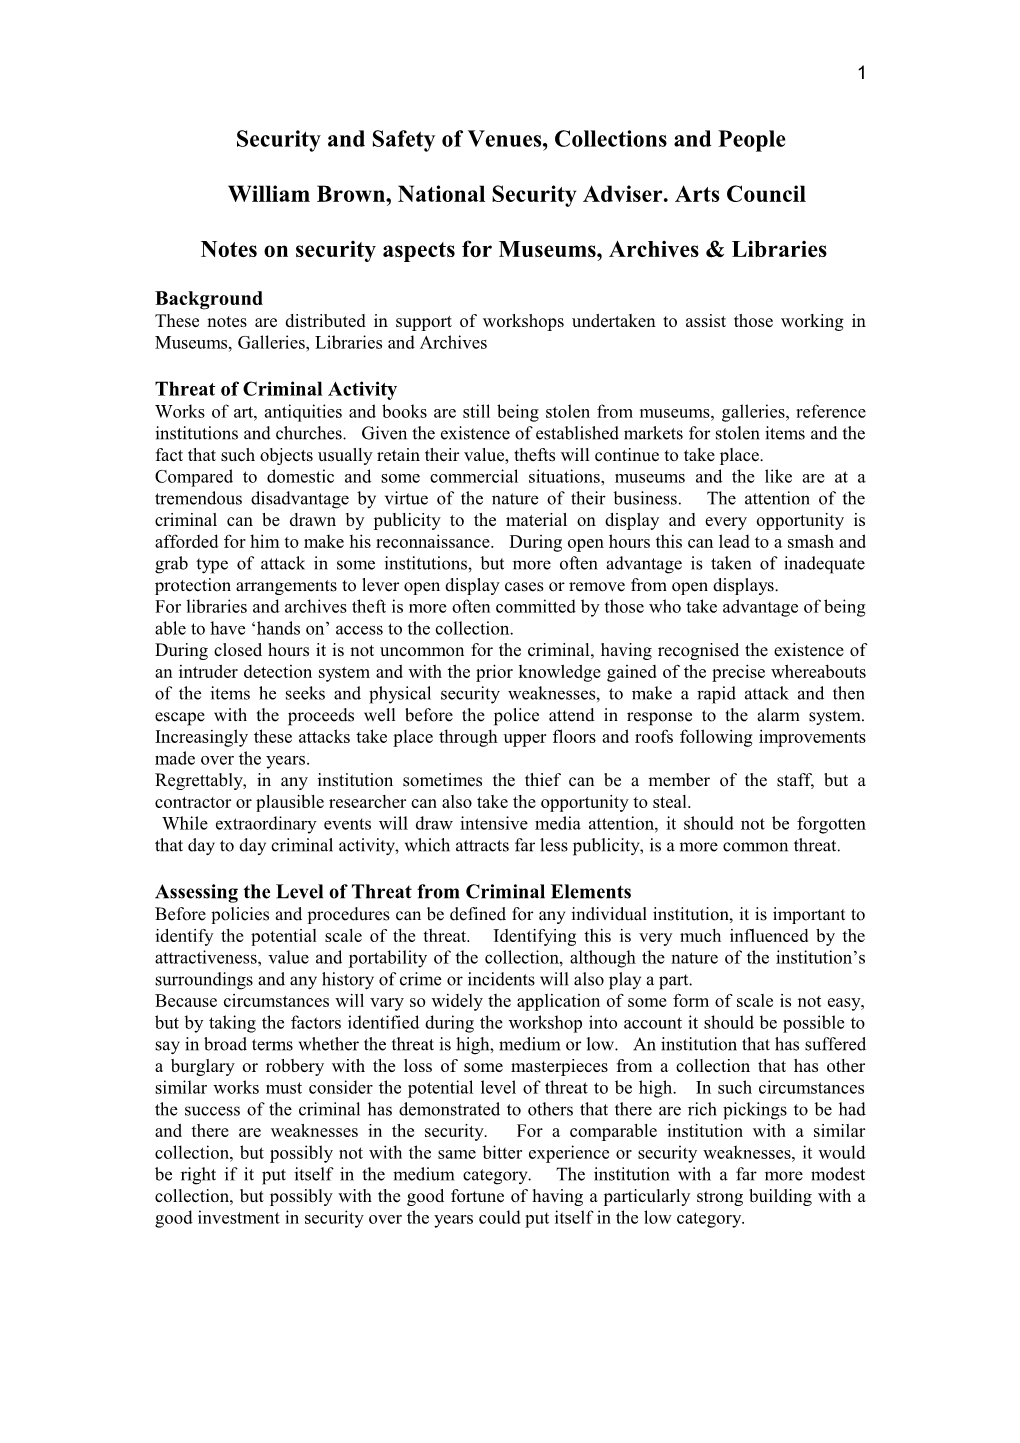 Security and Safety of Venues, Collections and People